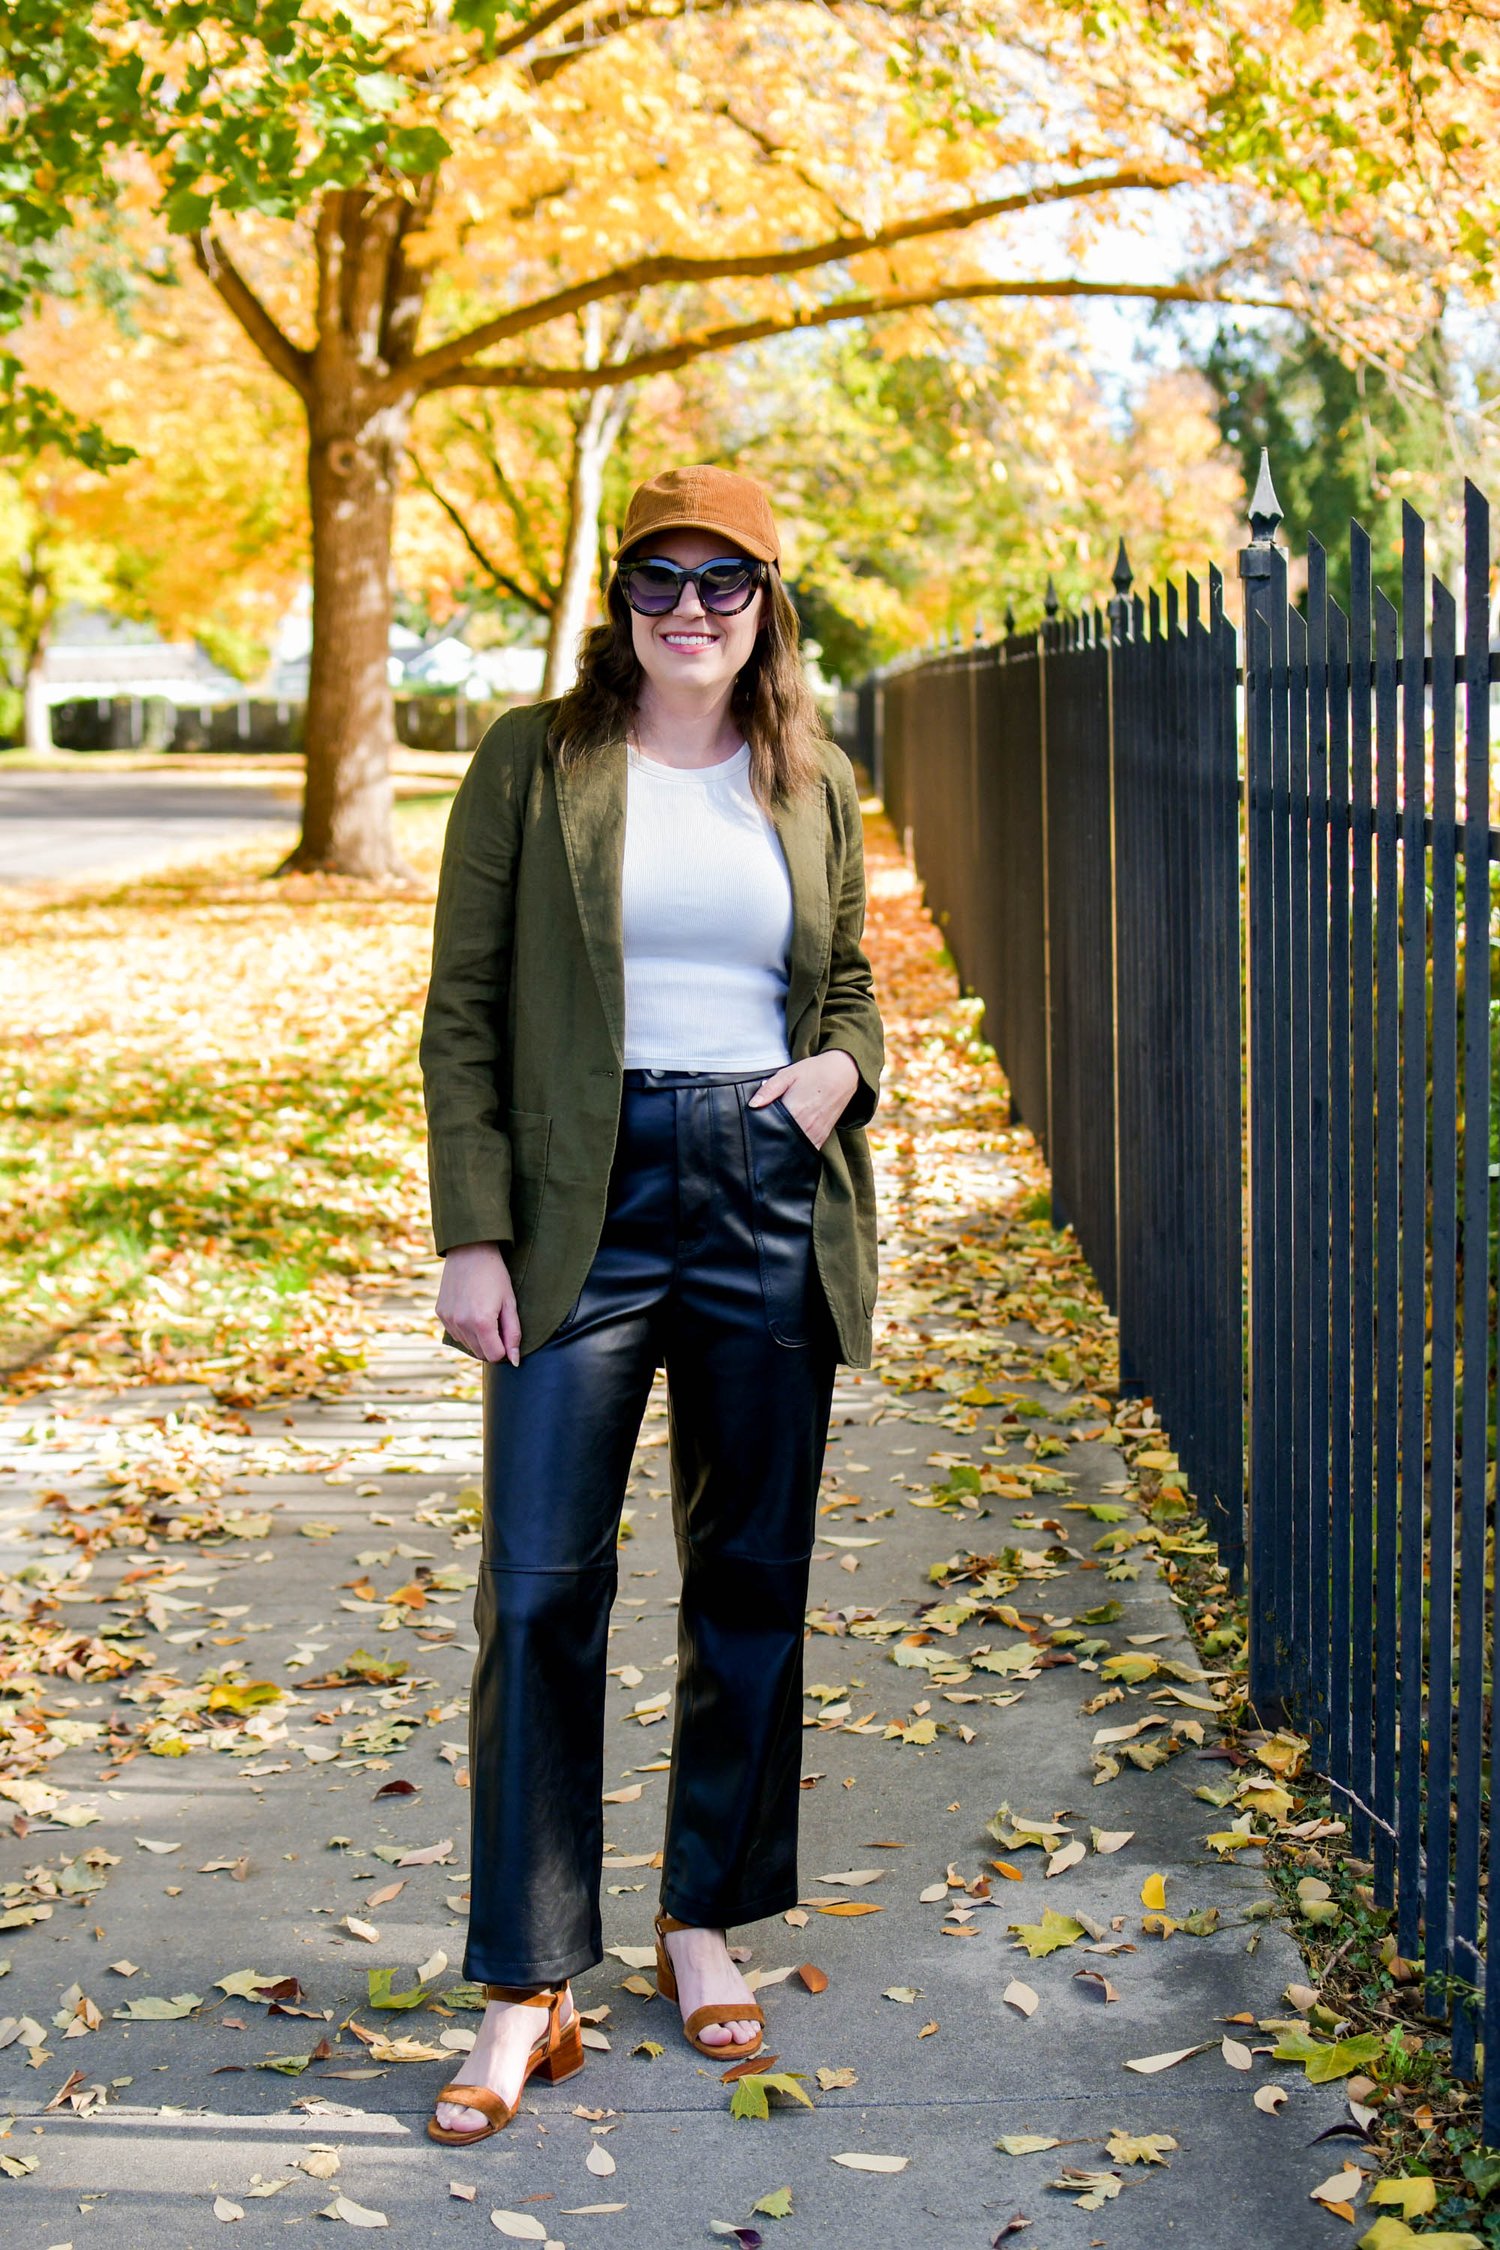 What to Wear with Leather Pants